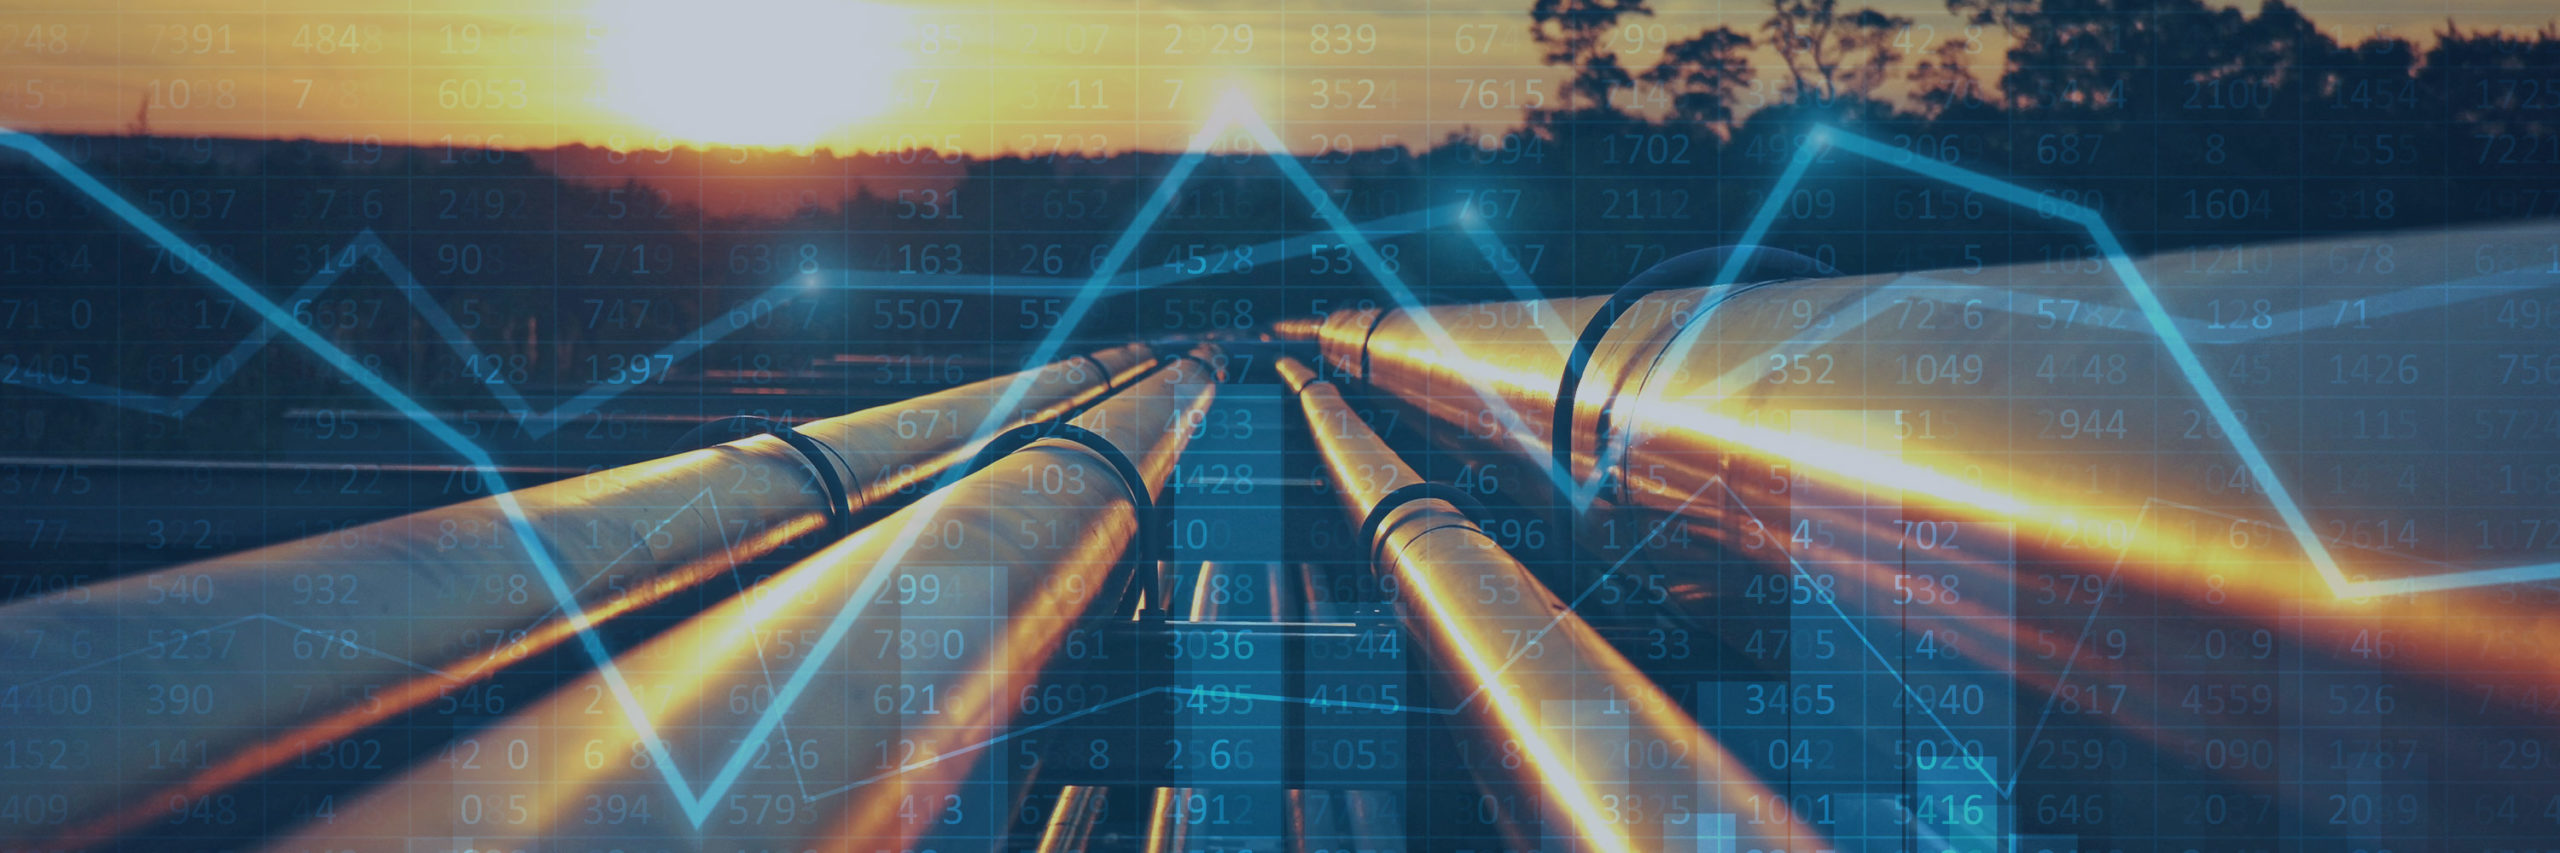 Pipeline installations spend to increase by c. 10% to $45 bn in 2021